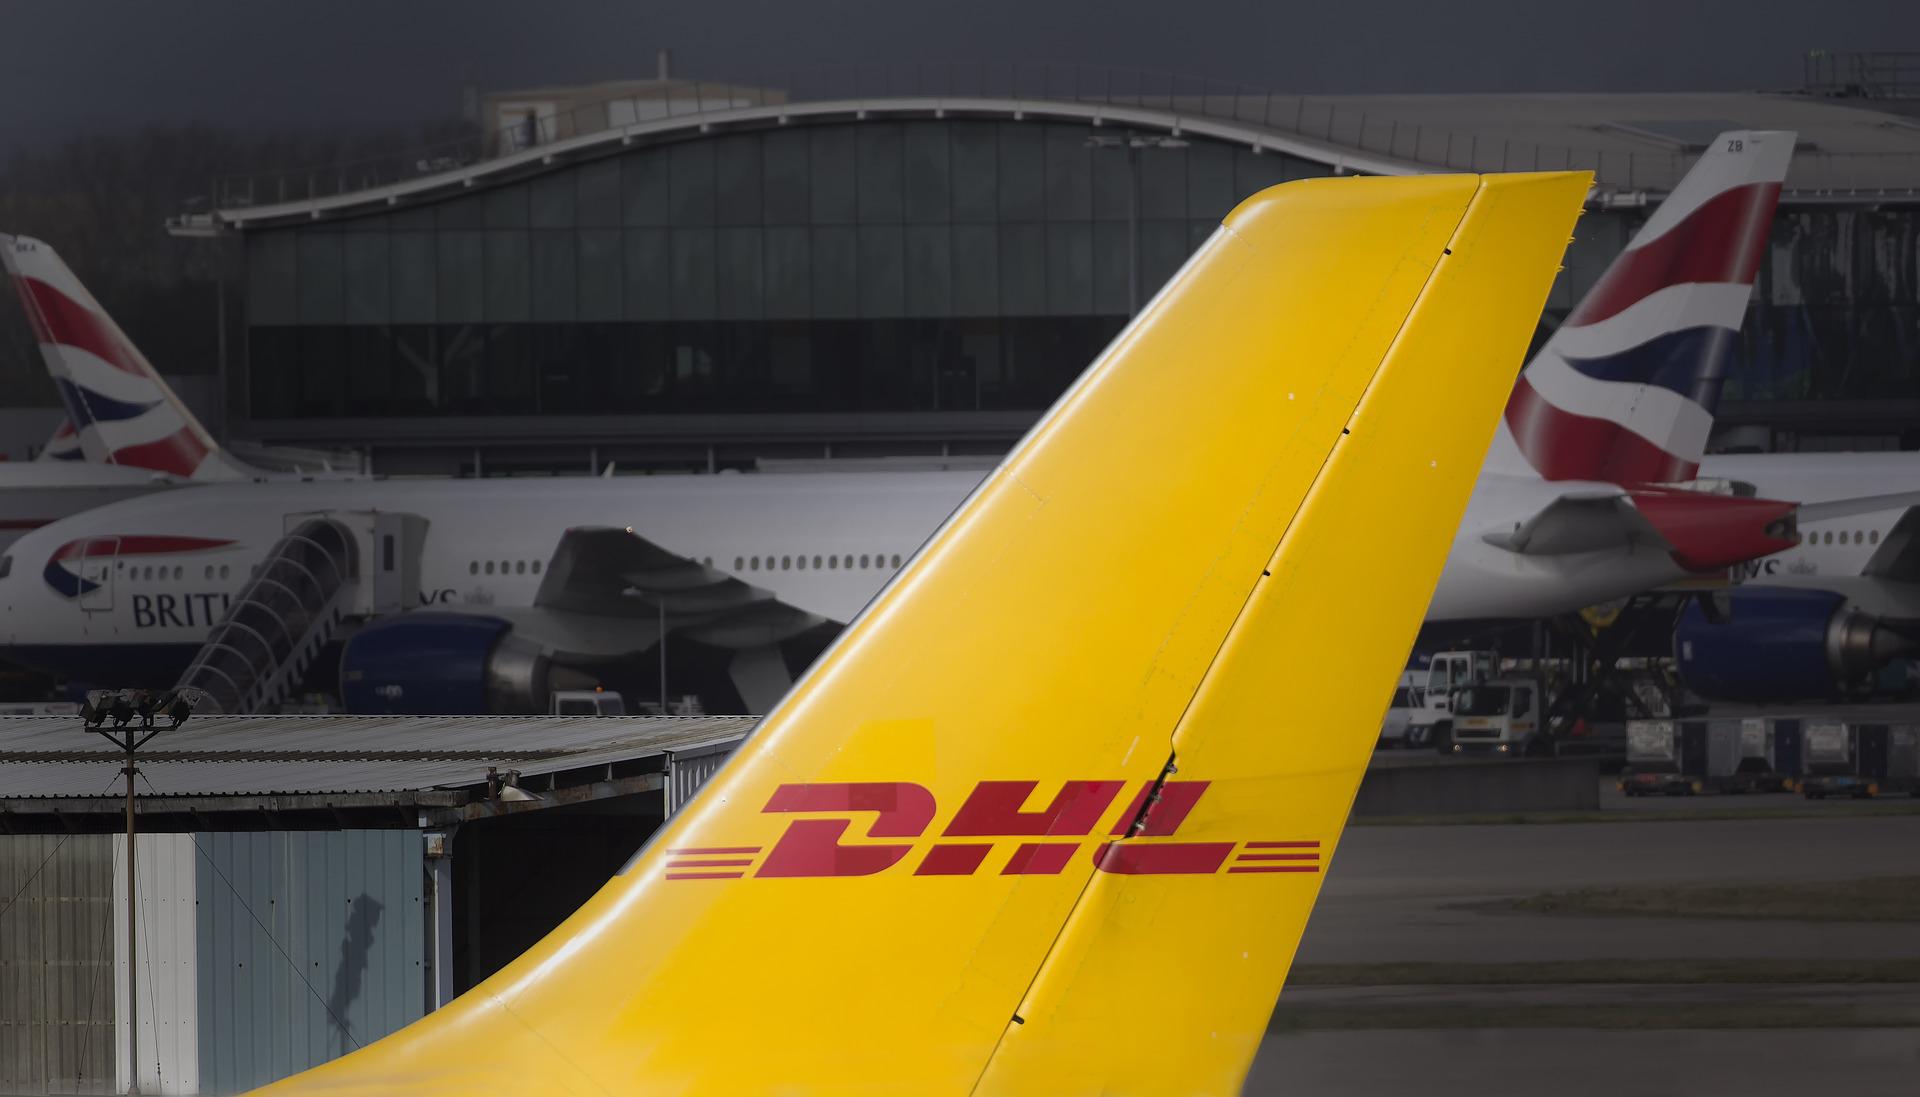 The tail of a DHL cargo airplane.